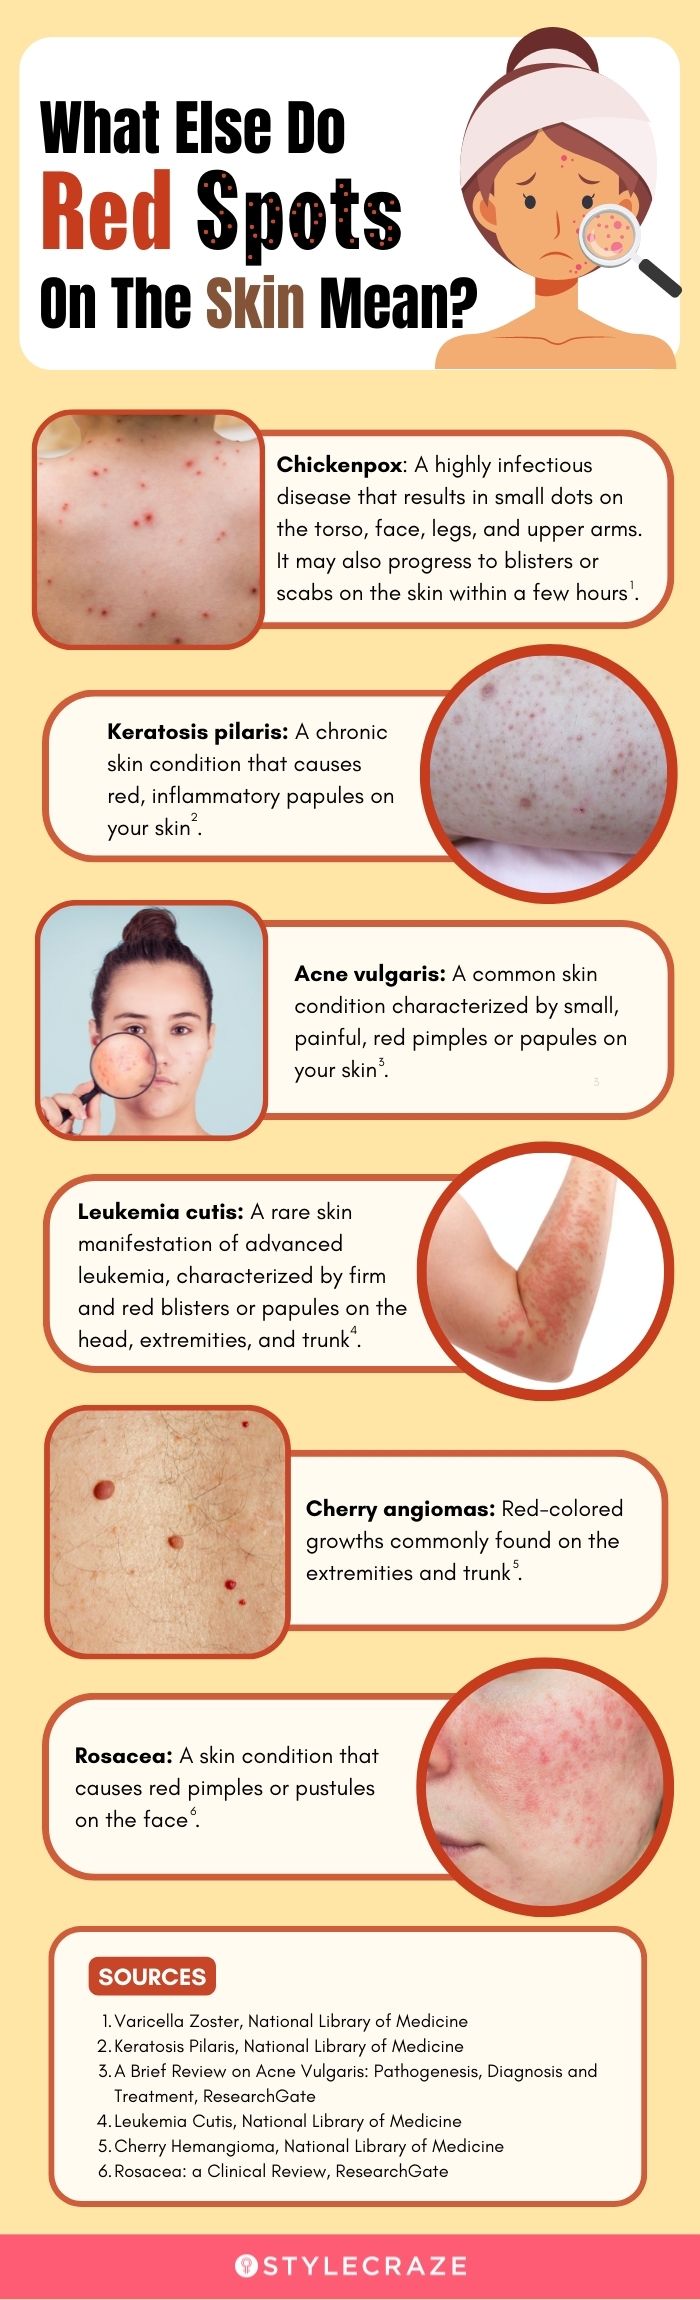 what else do red spots on skin mean [infographic]